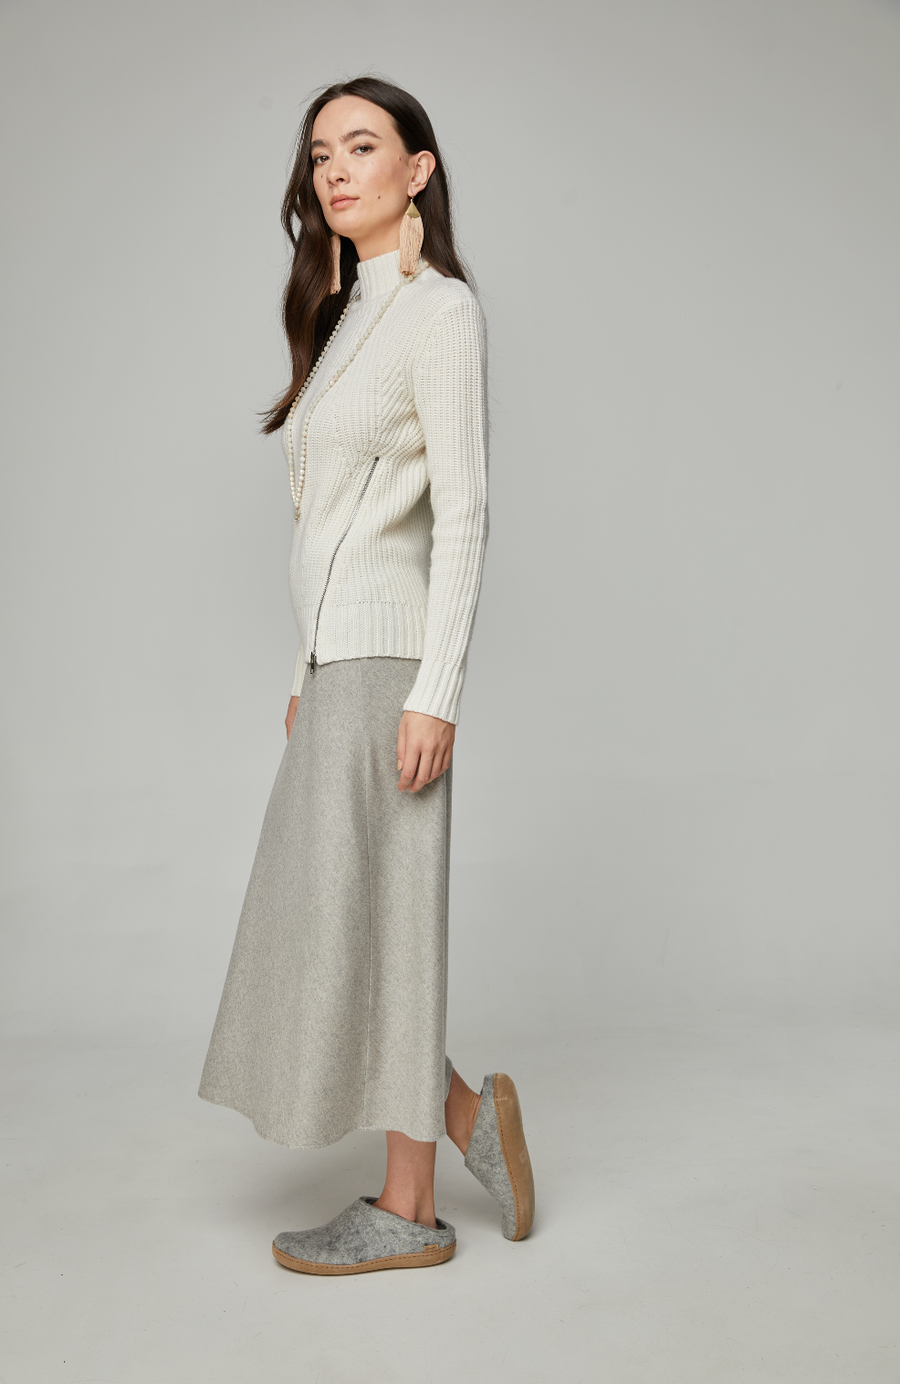 The Coquitlam Cashmere Skirt